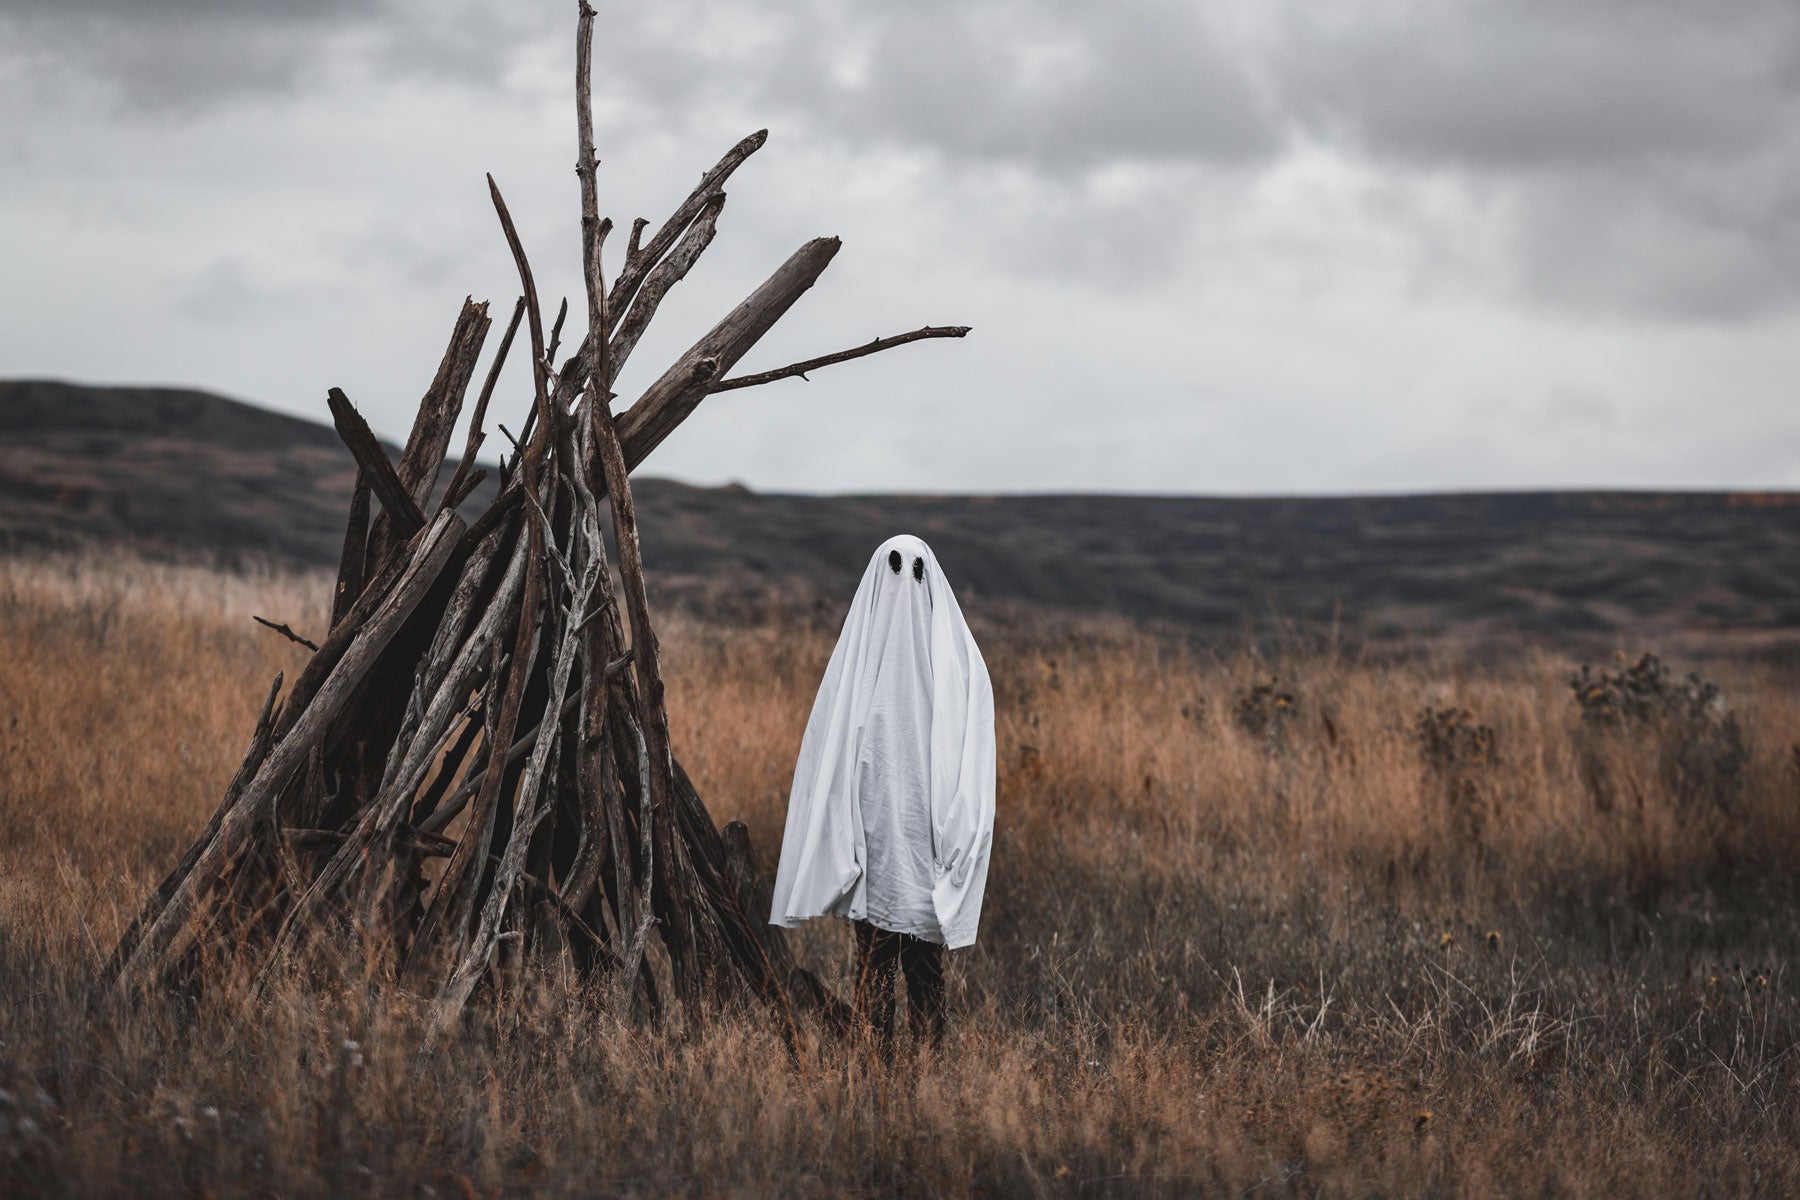 Hiker in ghost costume standing next to a spooky wooden shelter.